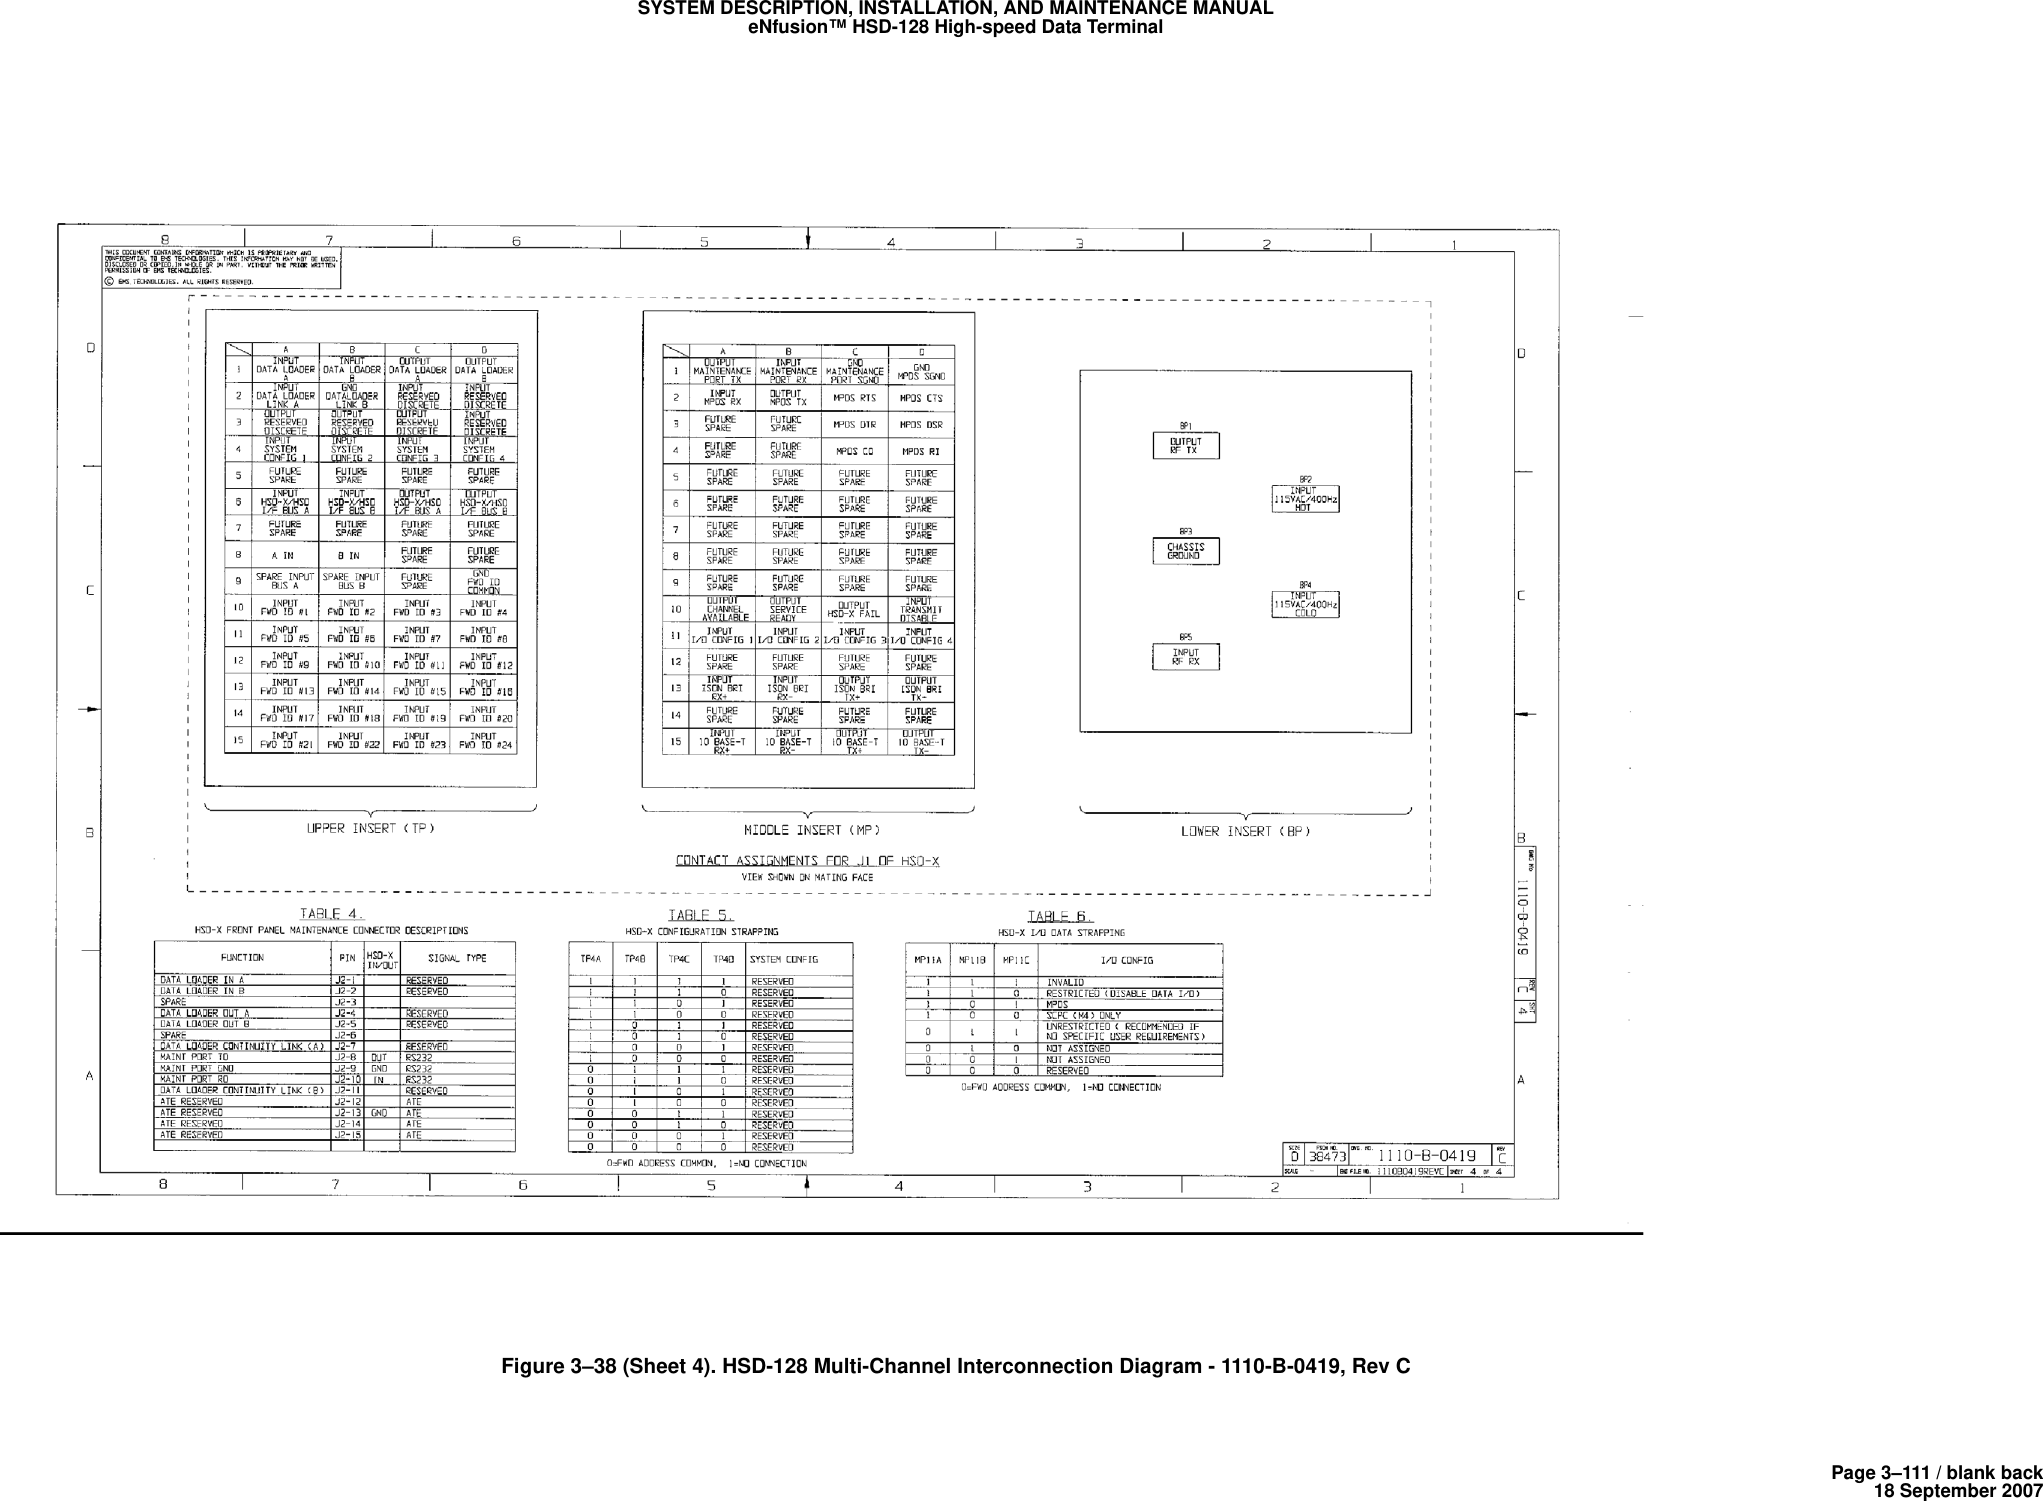 Page 3–111 / blank back18 September 2007SYSTEM DESCRIPTION, INSTALLATION, AND MAINTENANCE MANUALeNfusion™ HSD-128 High-speed Data TerminalFigure 3–38 (Sheet 4). HSD-128 Multi-Channel Interconnection Diagram - 1110-B-0419, Rev C